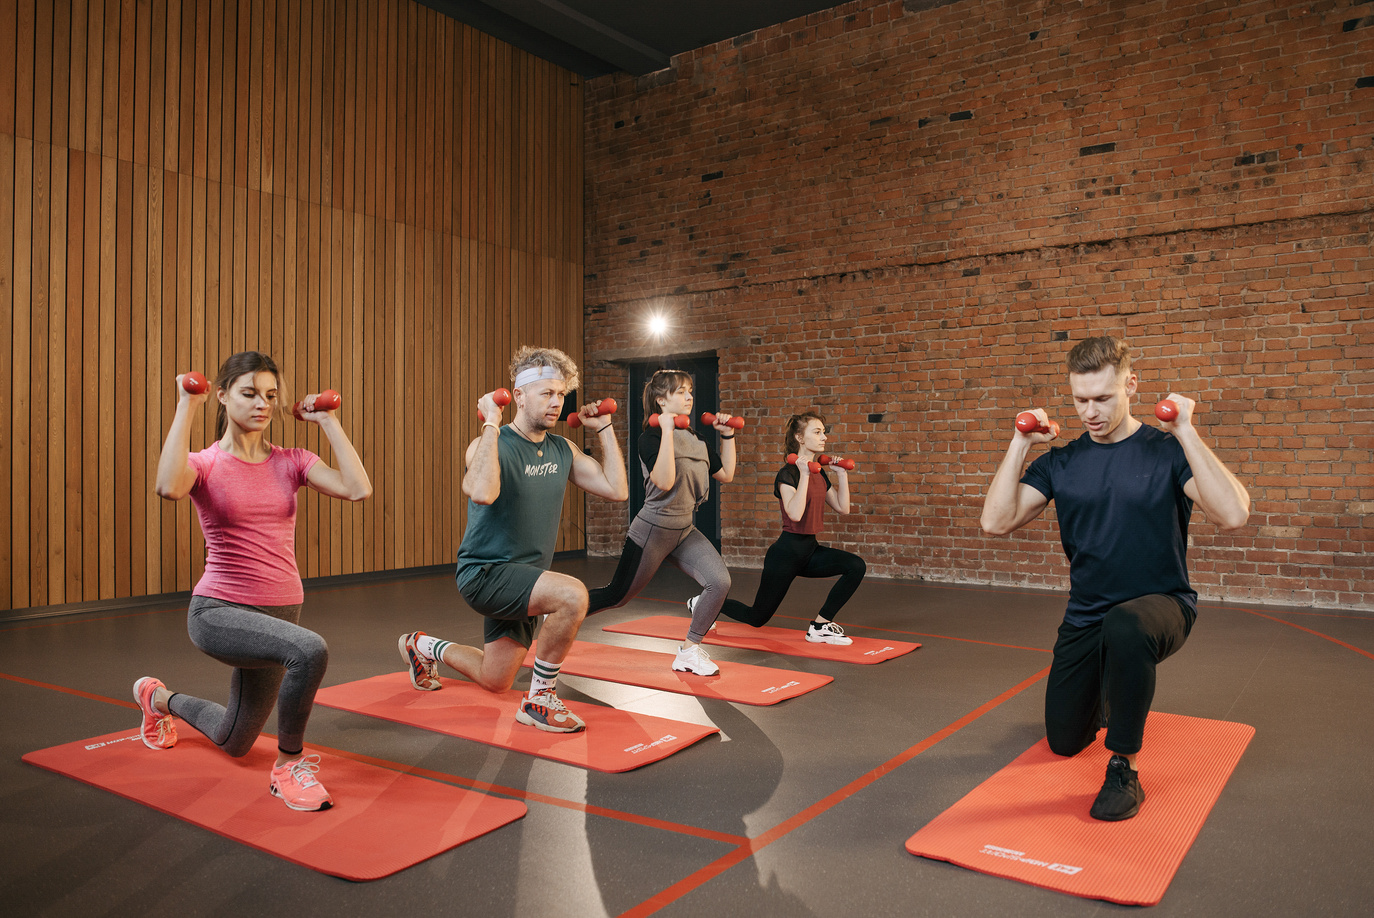 Group of People Exercising with Dumbbells on a Yoga Mat